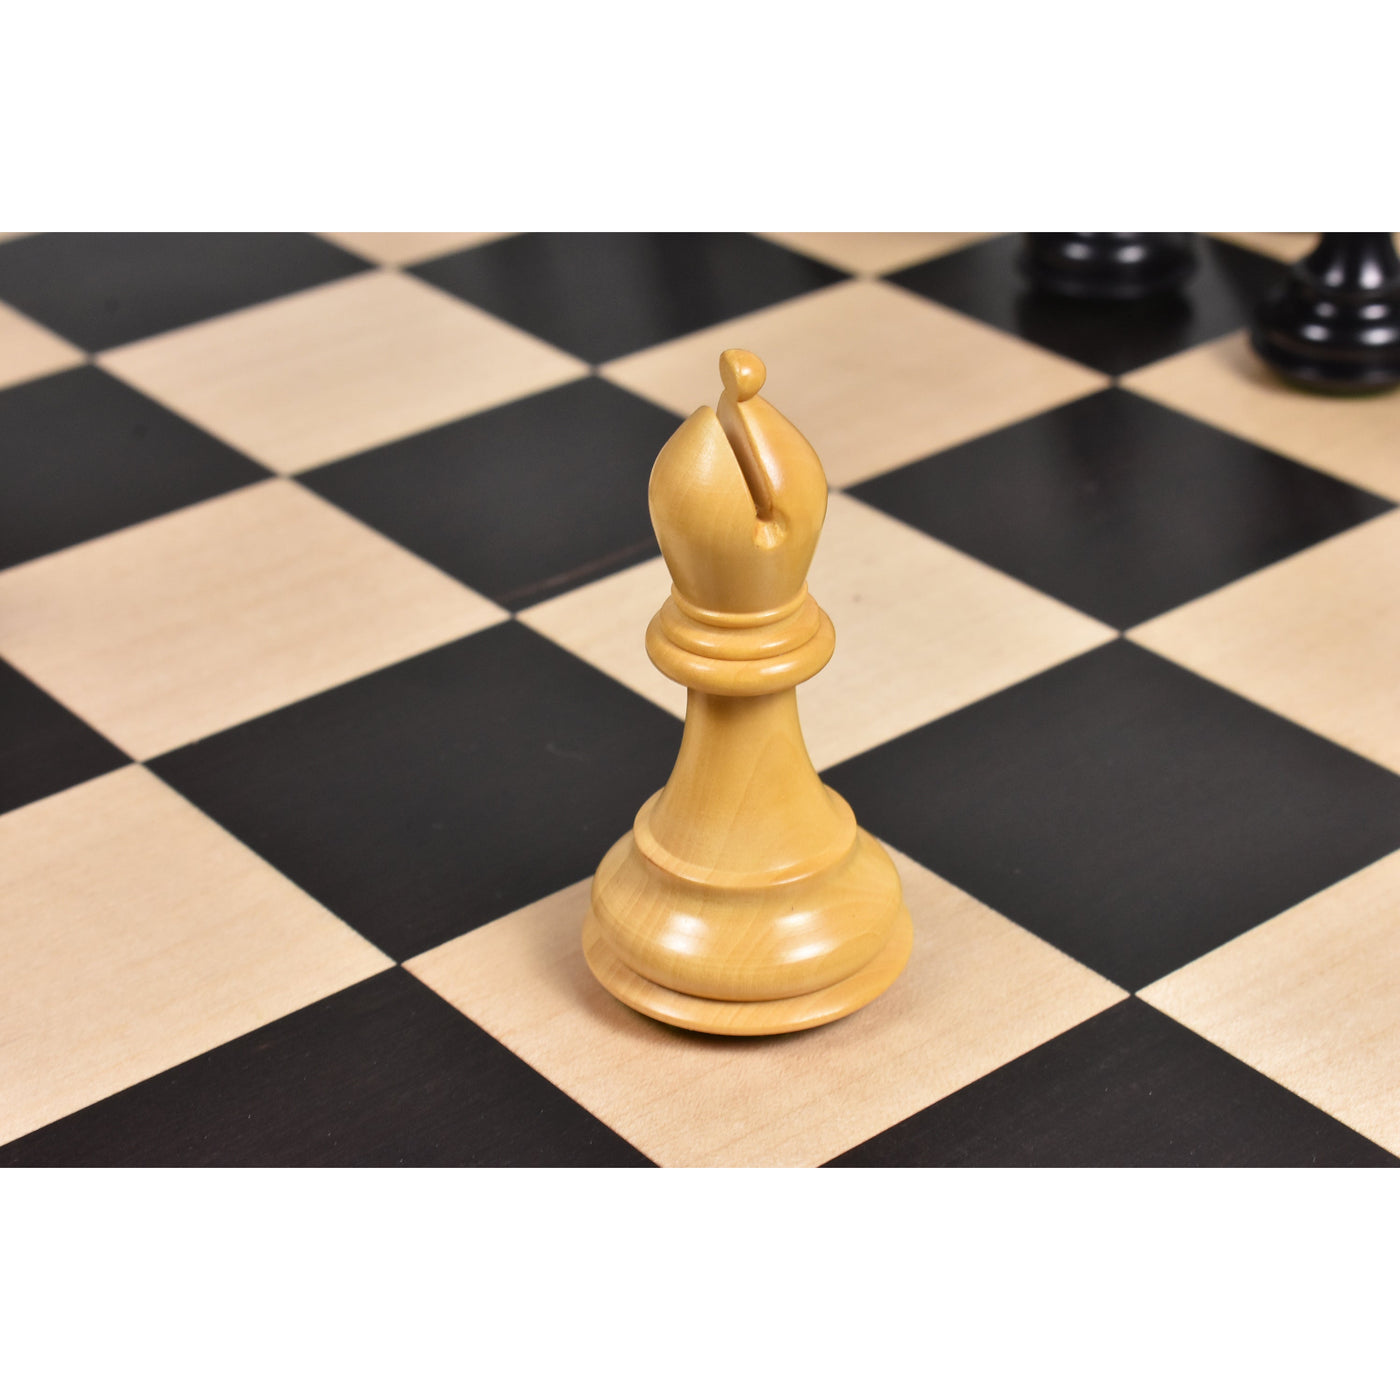 3.6" Professional Staunton Chess Set - Chess Pieces Only- Weighted Ebonised Boxwood